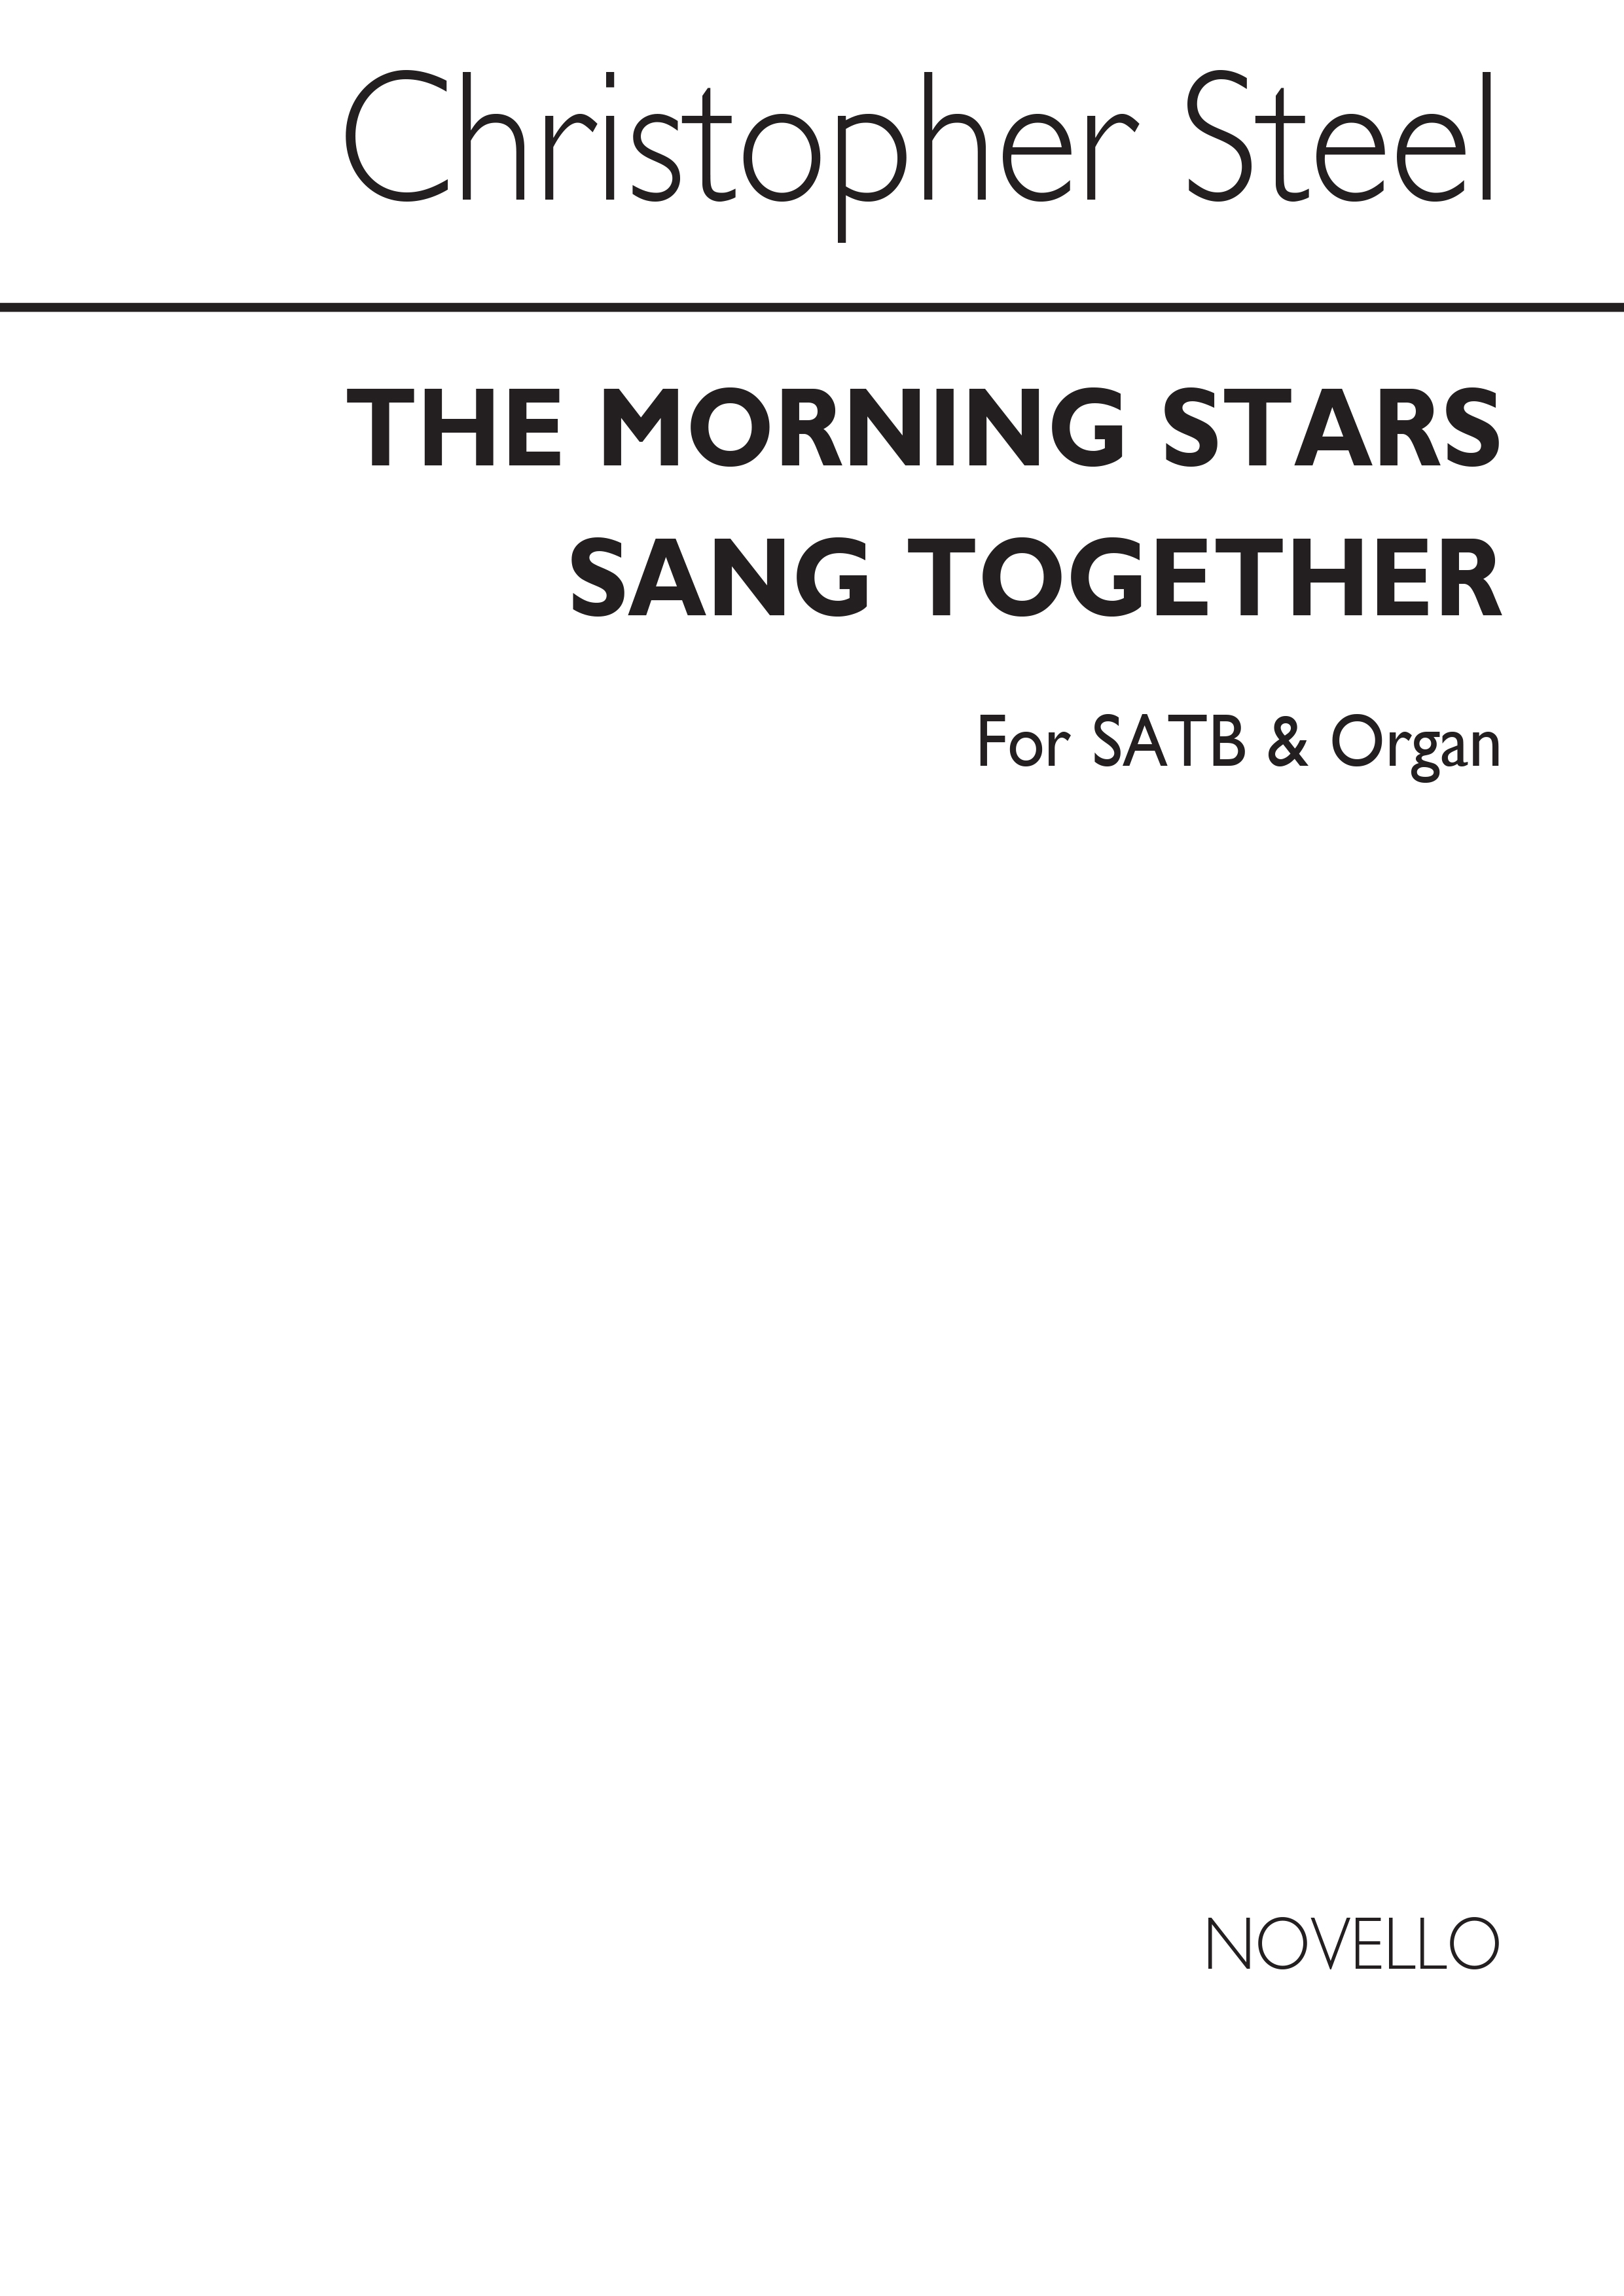 Steel: The Morning Stars Sang Together for SATB Chorus with Organ acc.